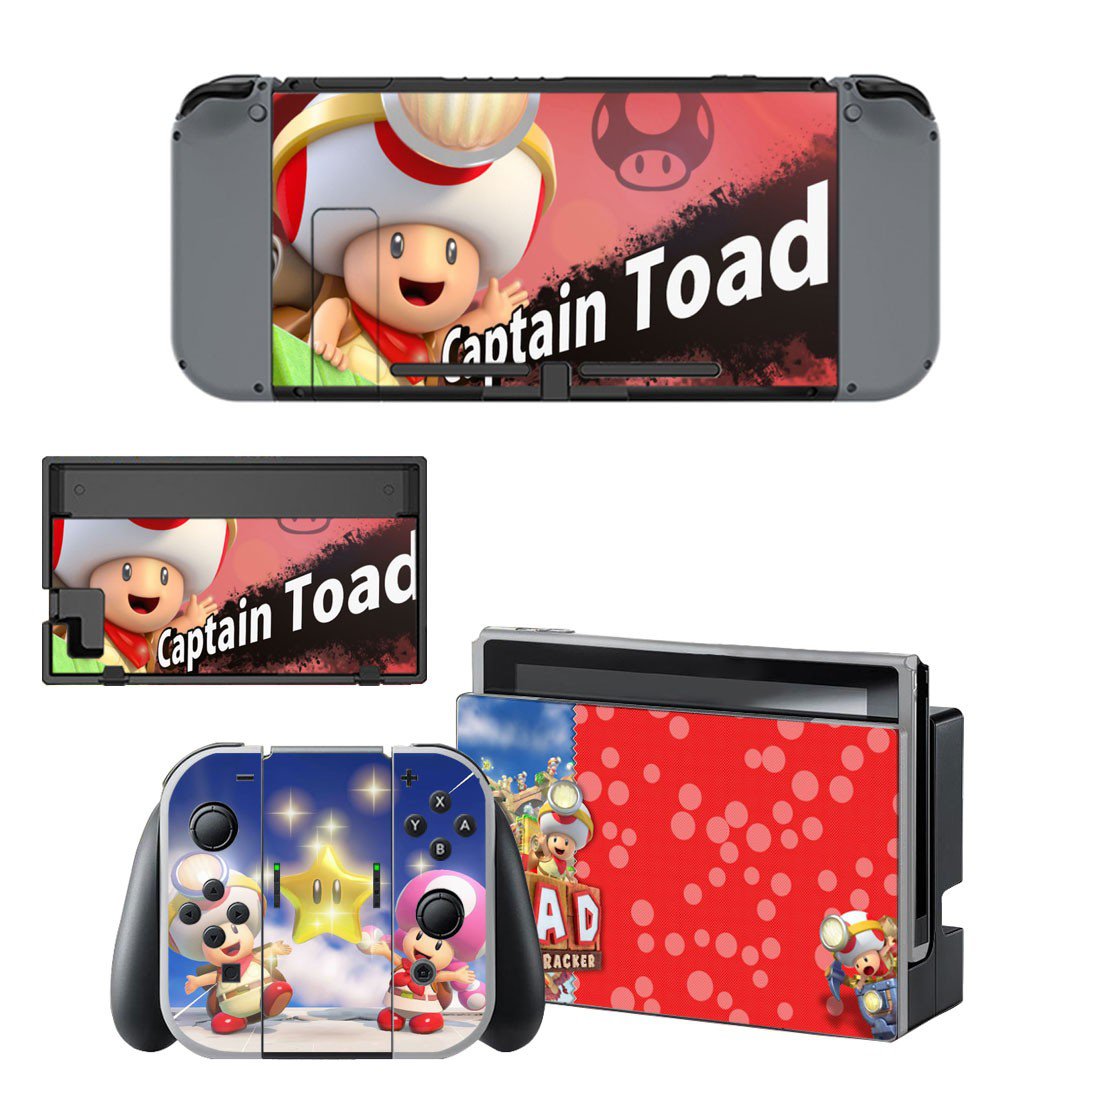 download free nintendo switch toad